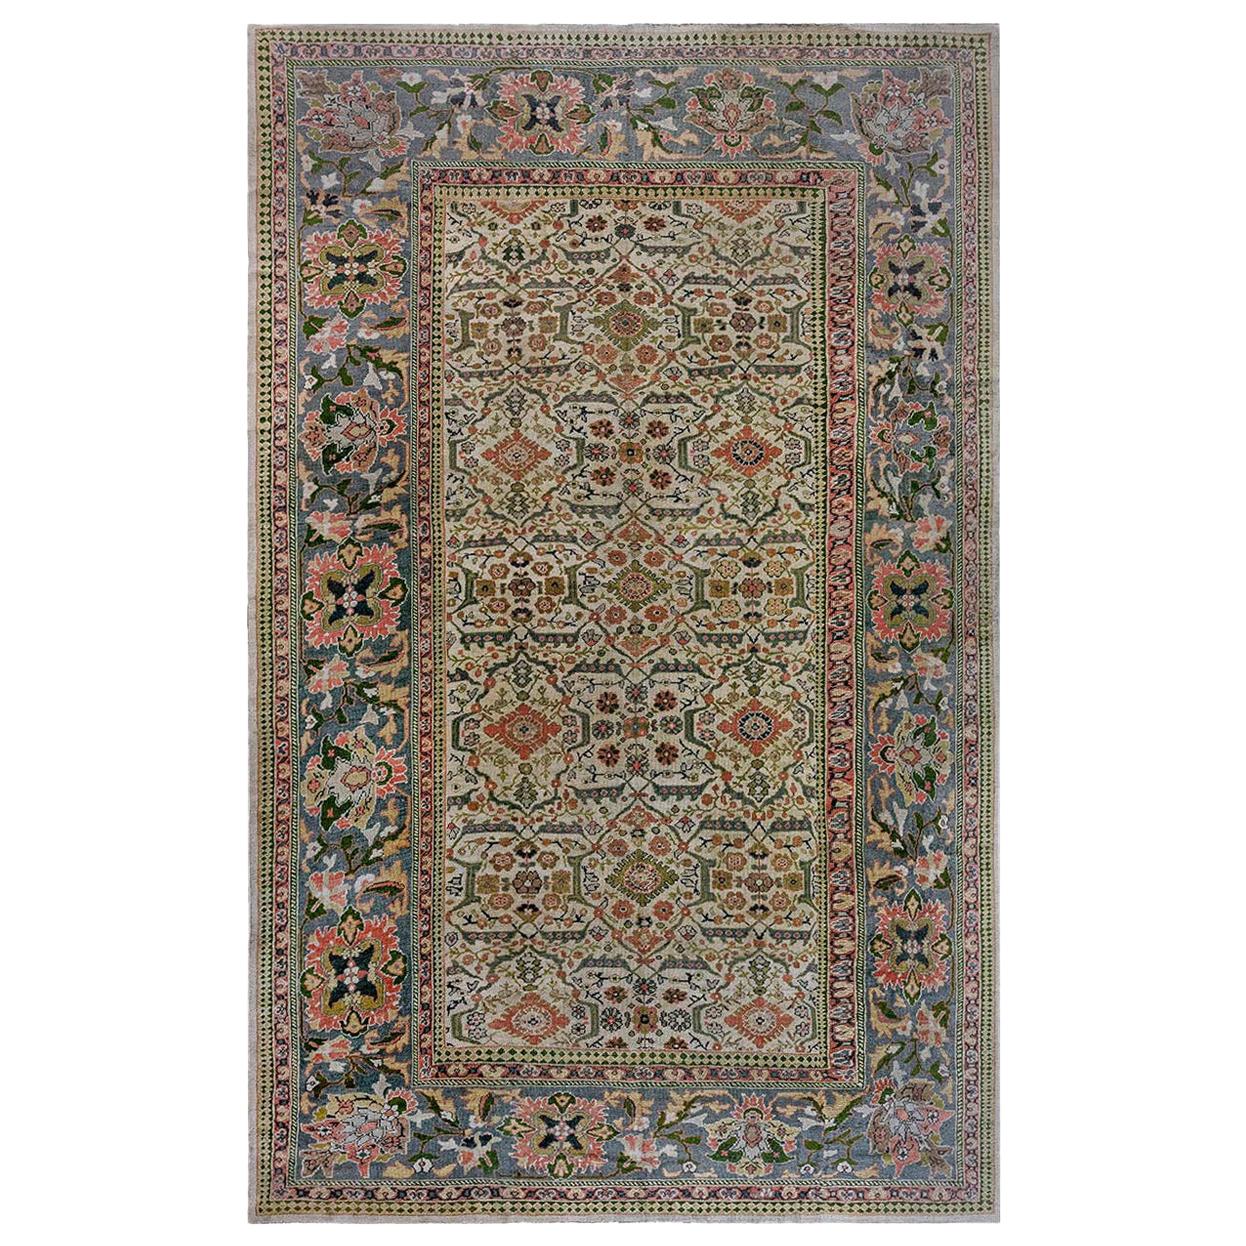 Antique Persian Sultanabad Rug Size Adjusted